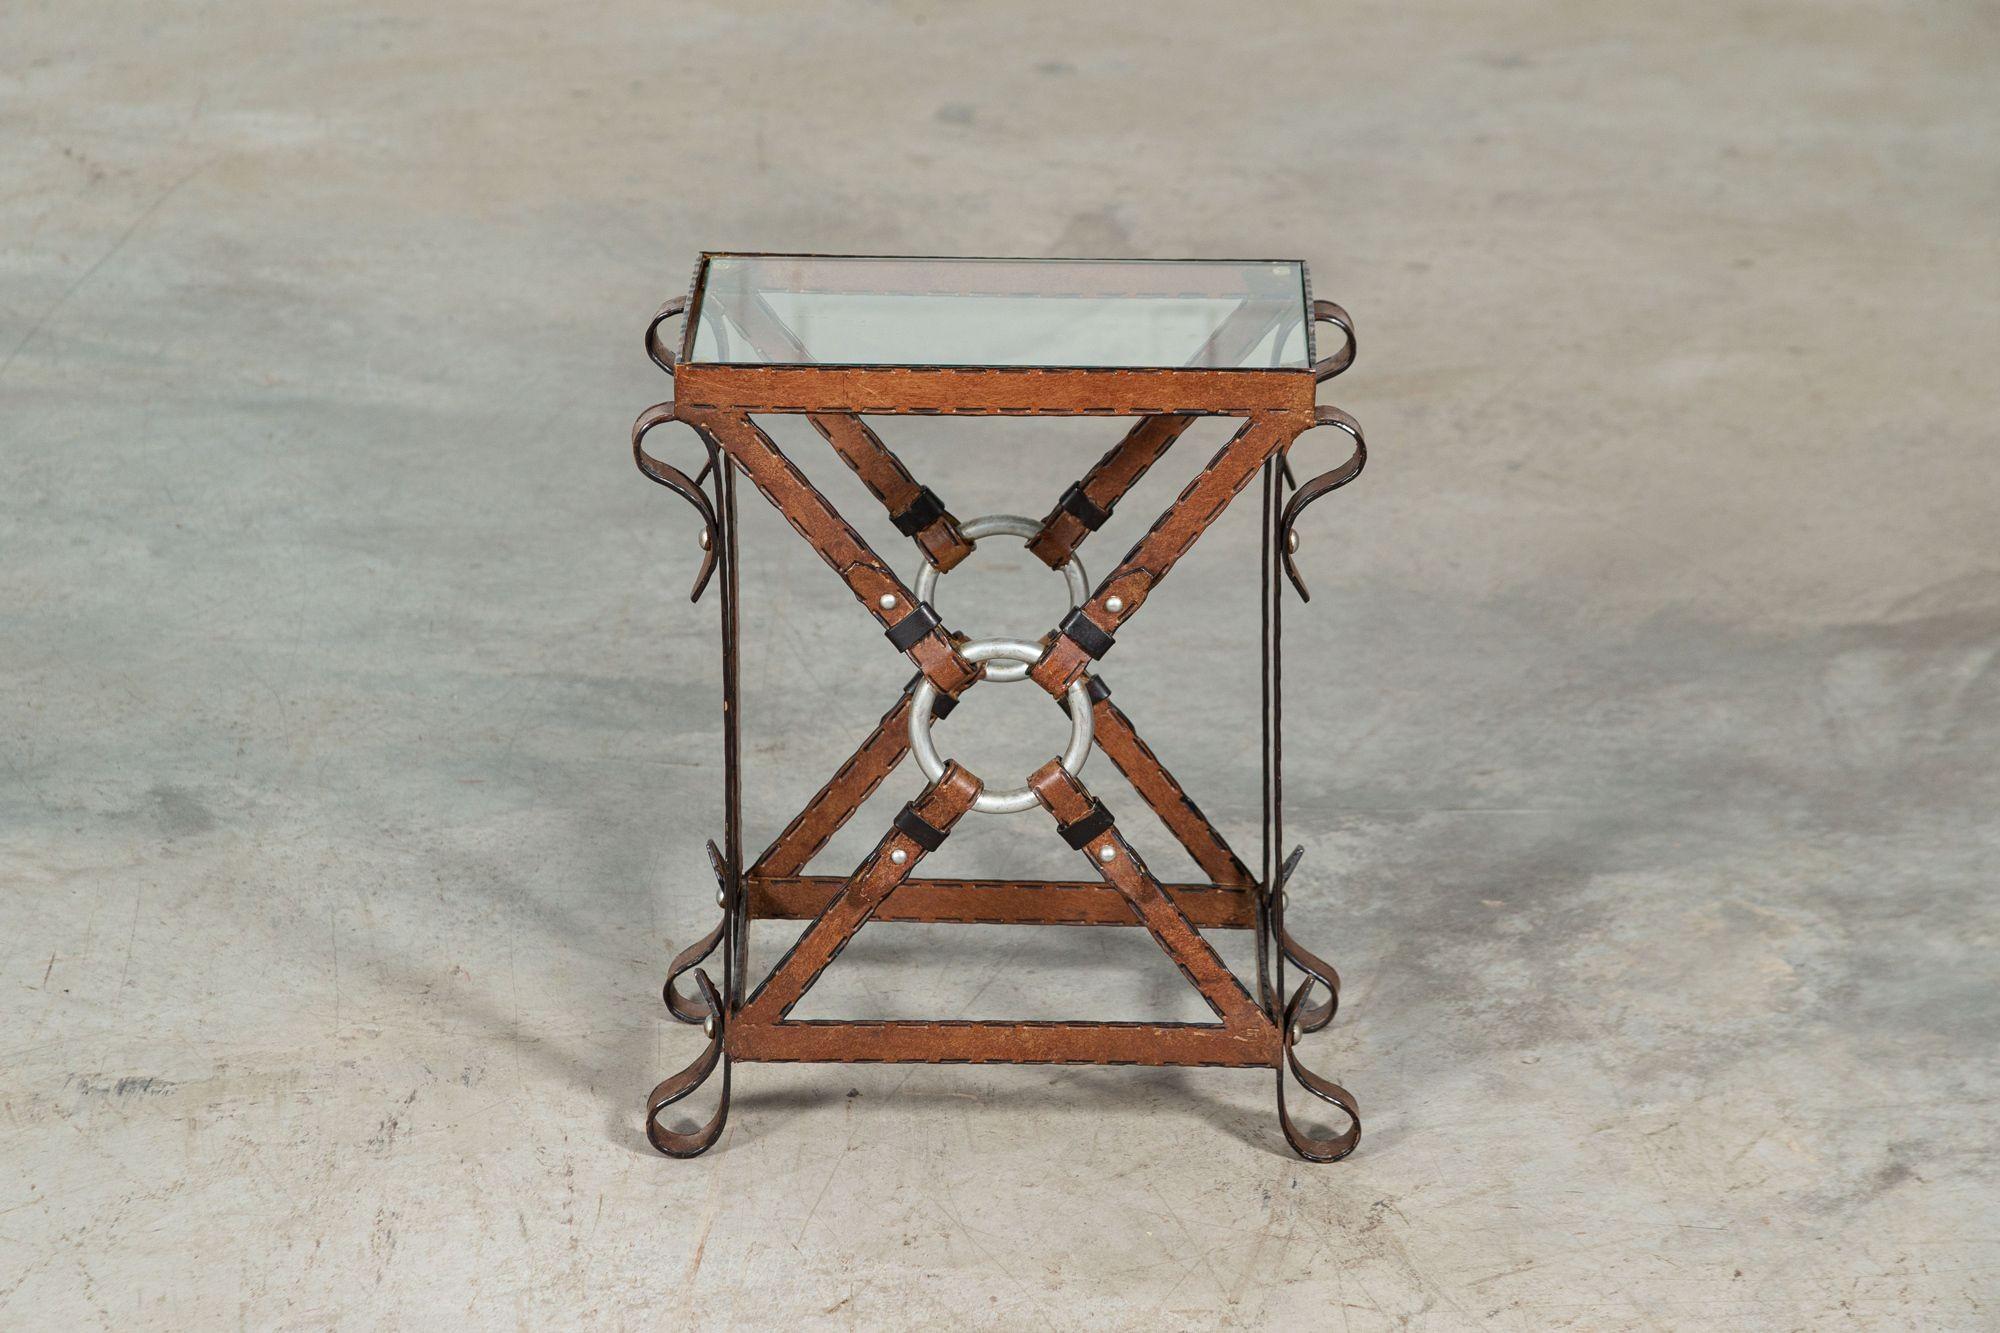 circa Mid-20th century
Jacques Adnet Style Iron Leather Side Table
W40 x D21 x H46 cm.